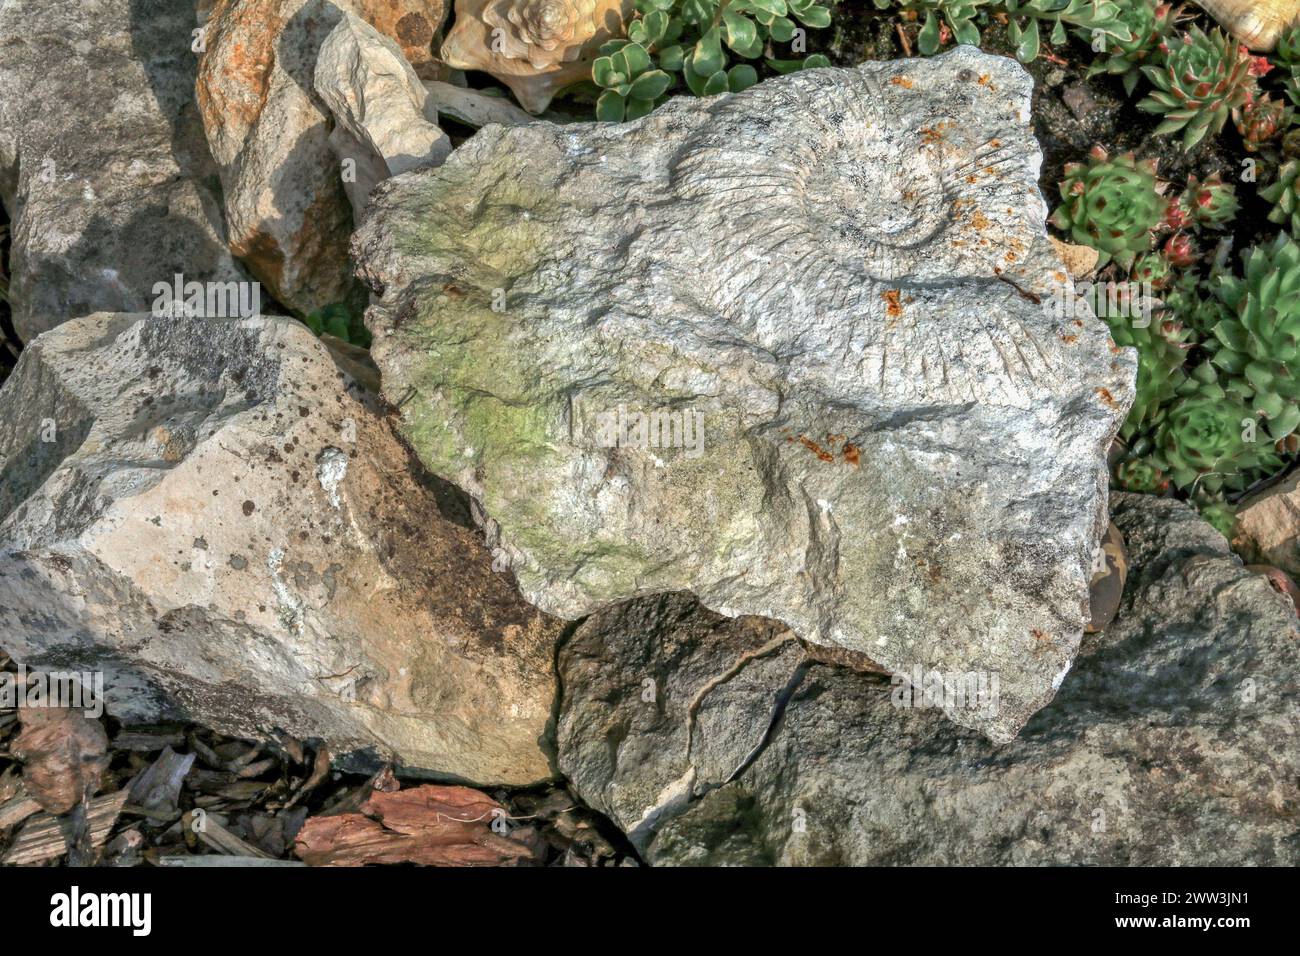 Ammonites and fossils of prehistoric animals imprinted in stone in the garden Stock Photo